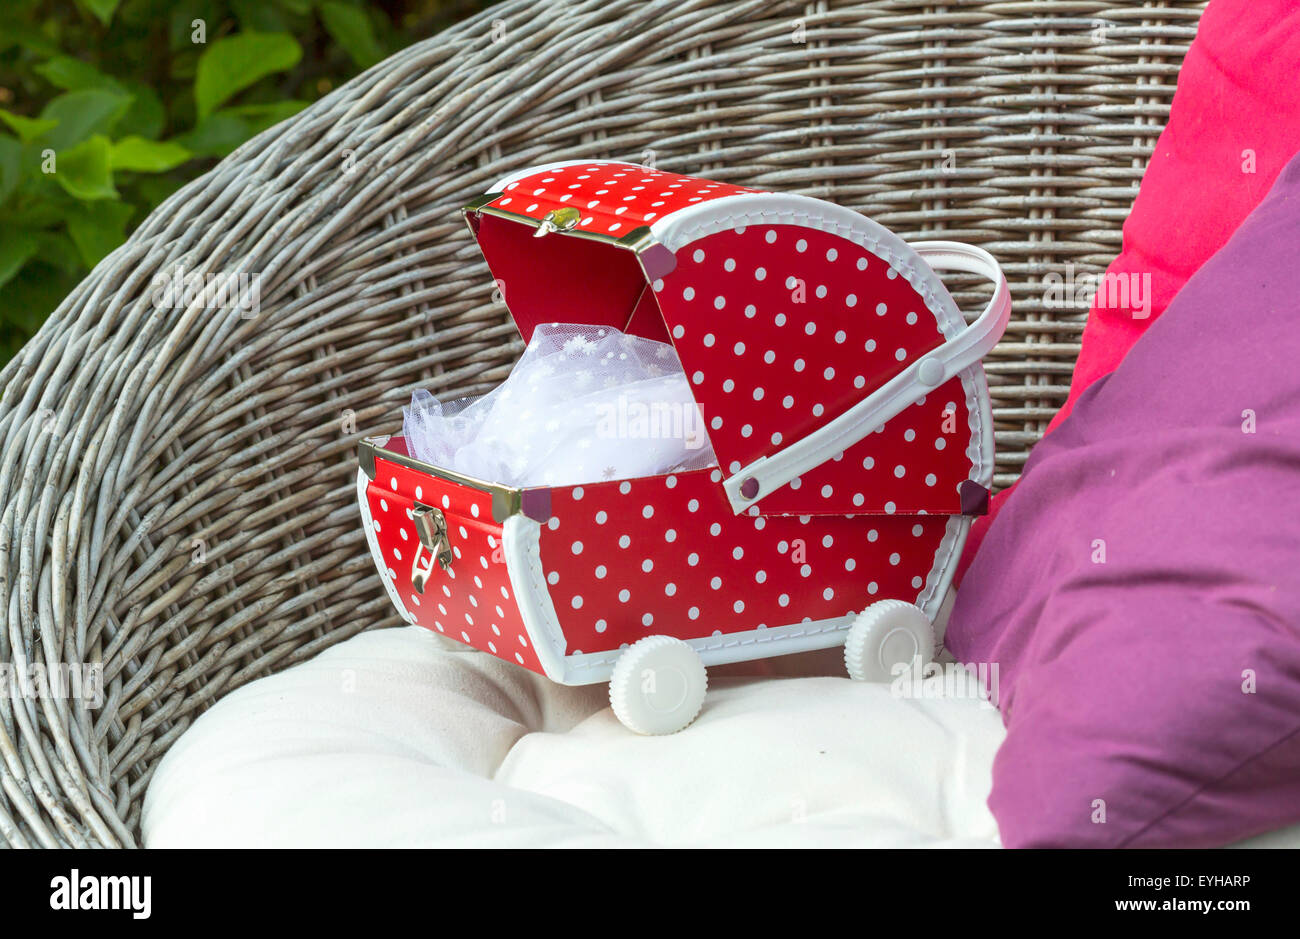 Little red doll buggy on a chair. Stock Photo